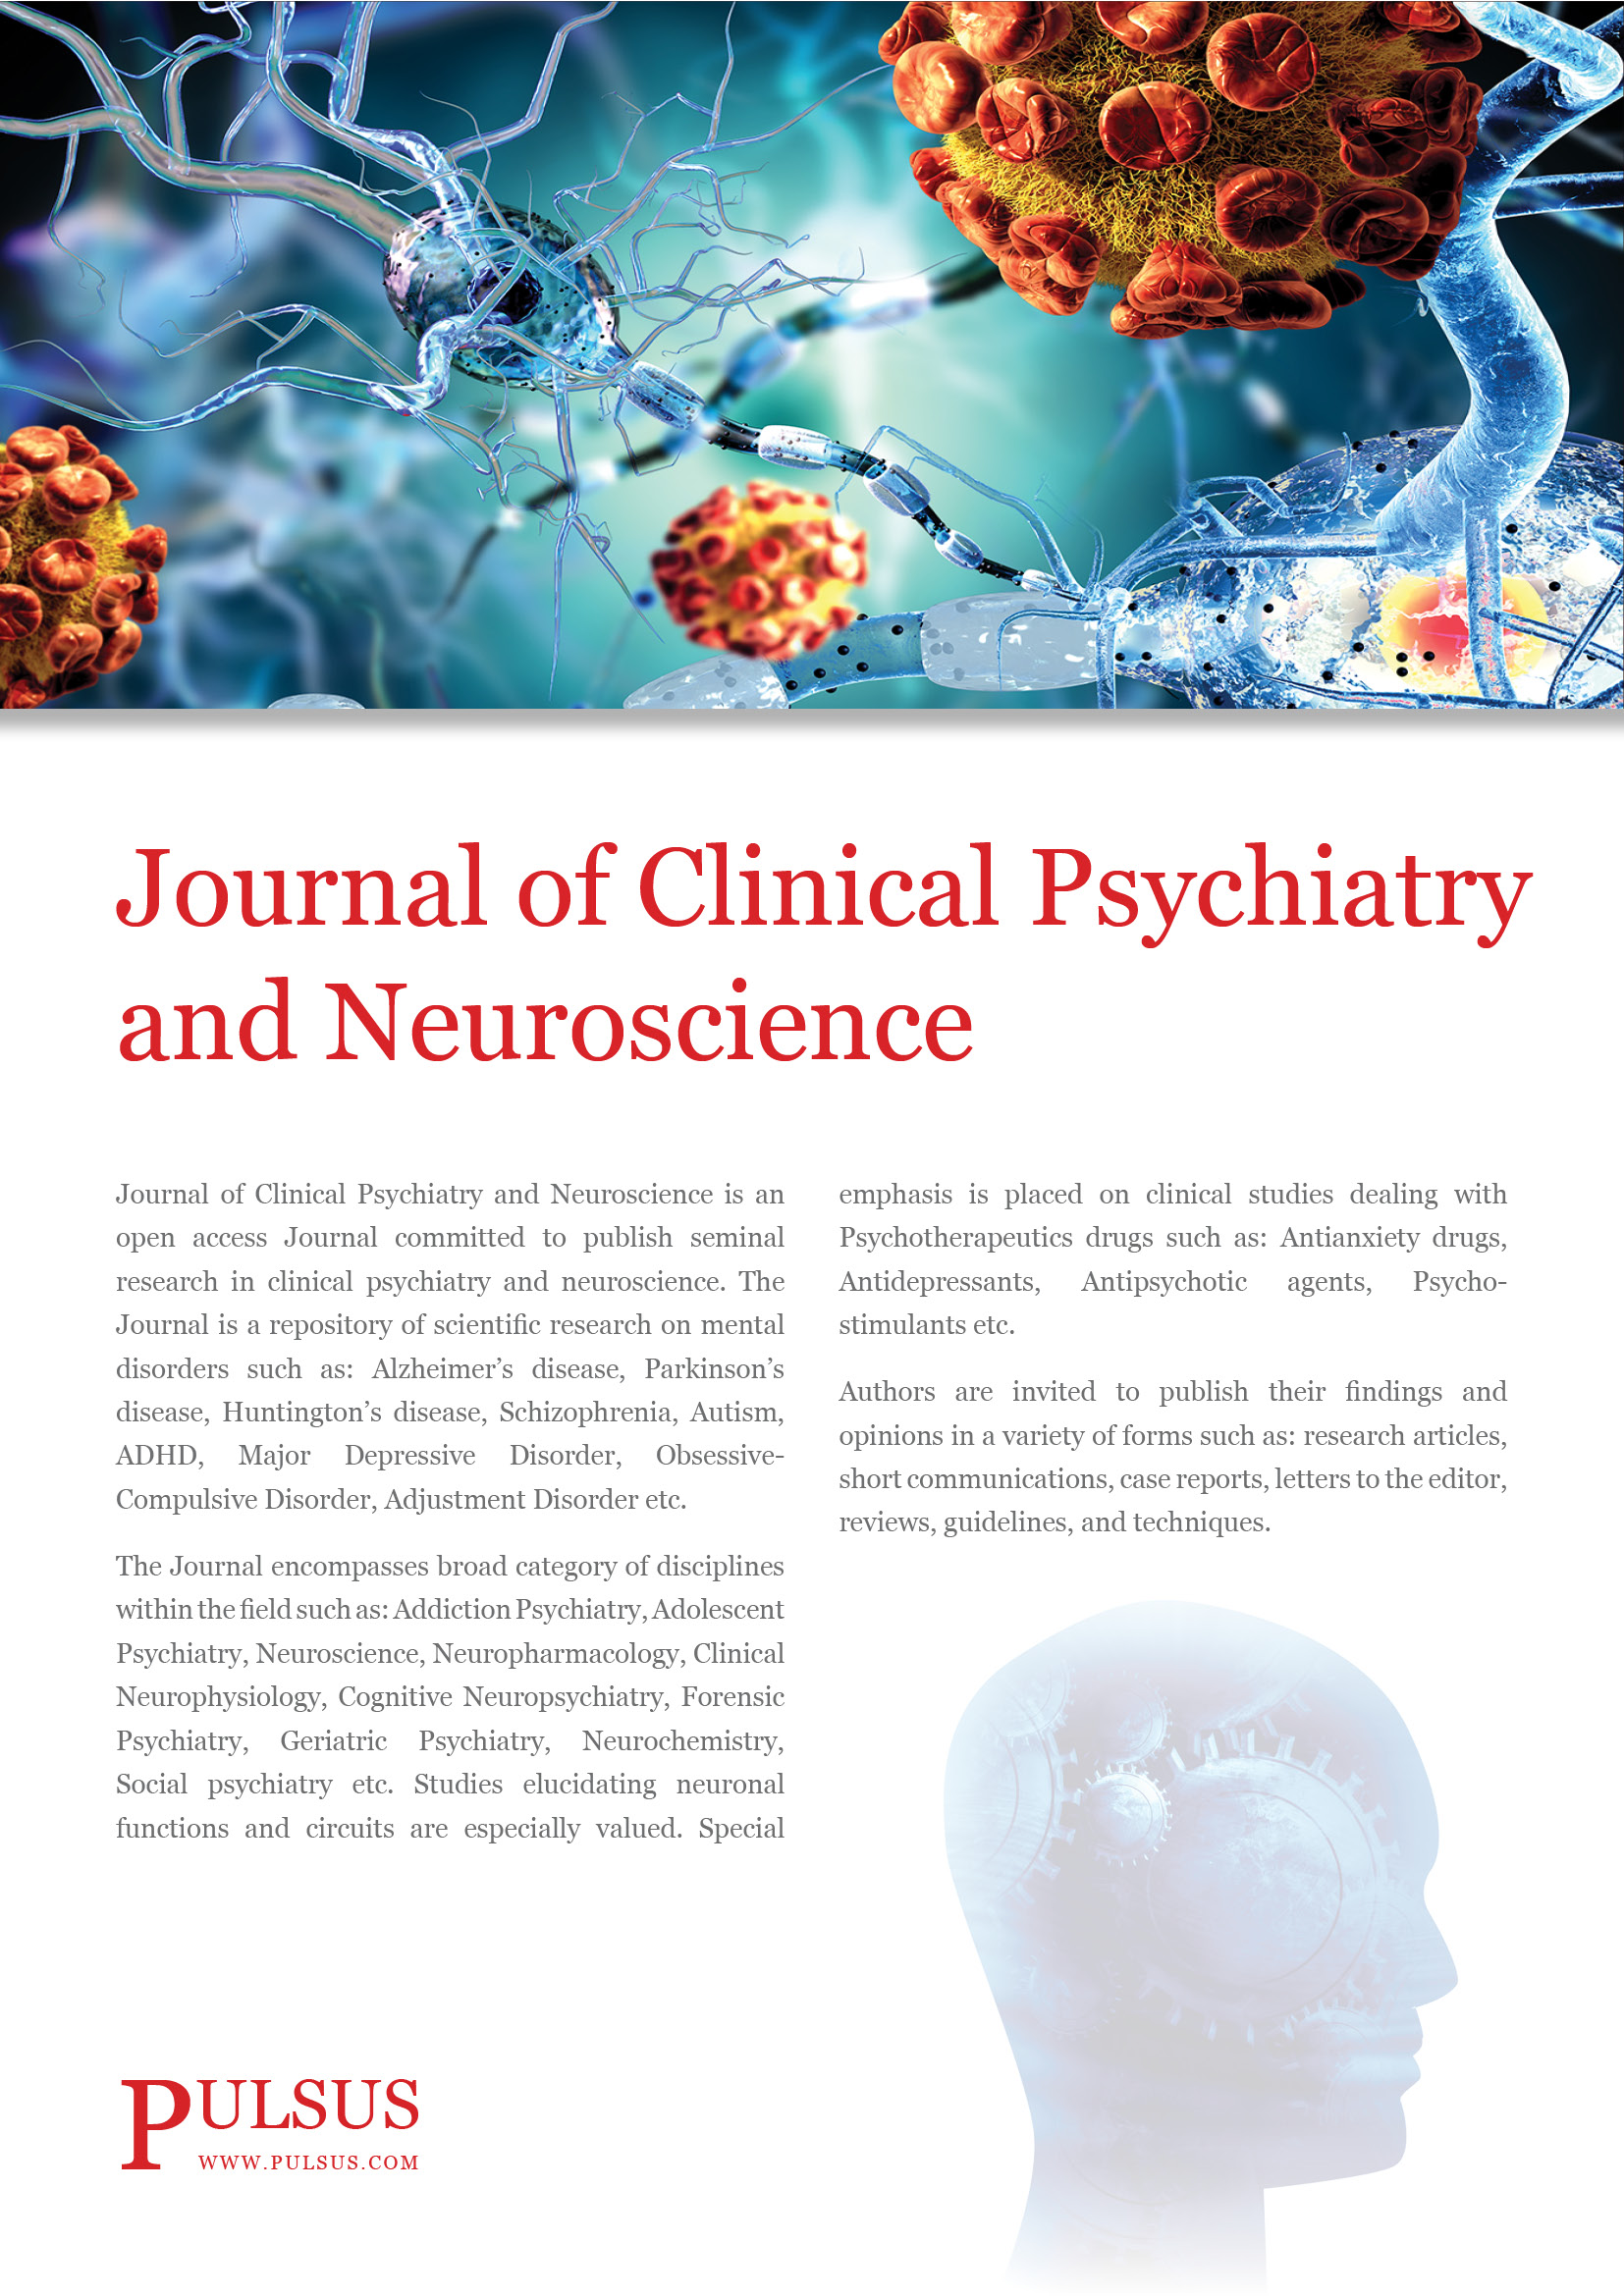 Journal of Clinical Psychiatry (JCP)